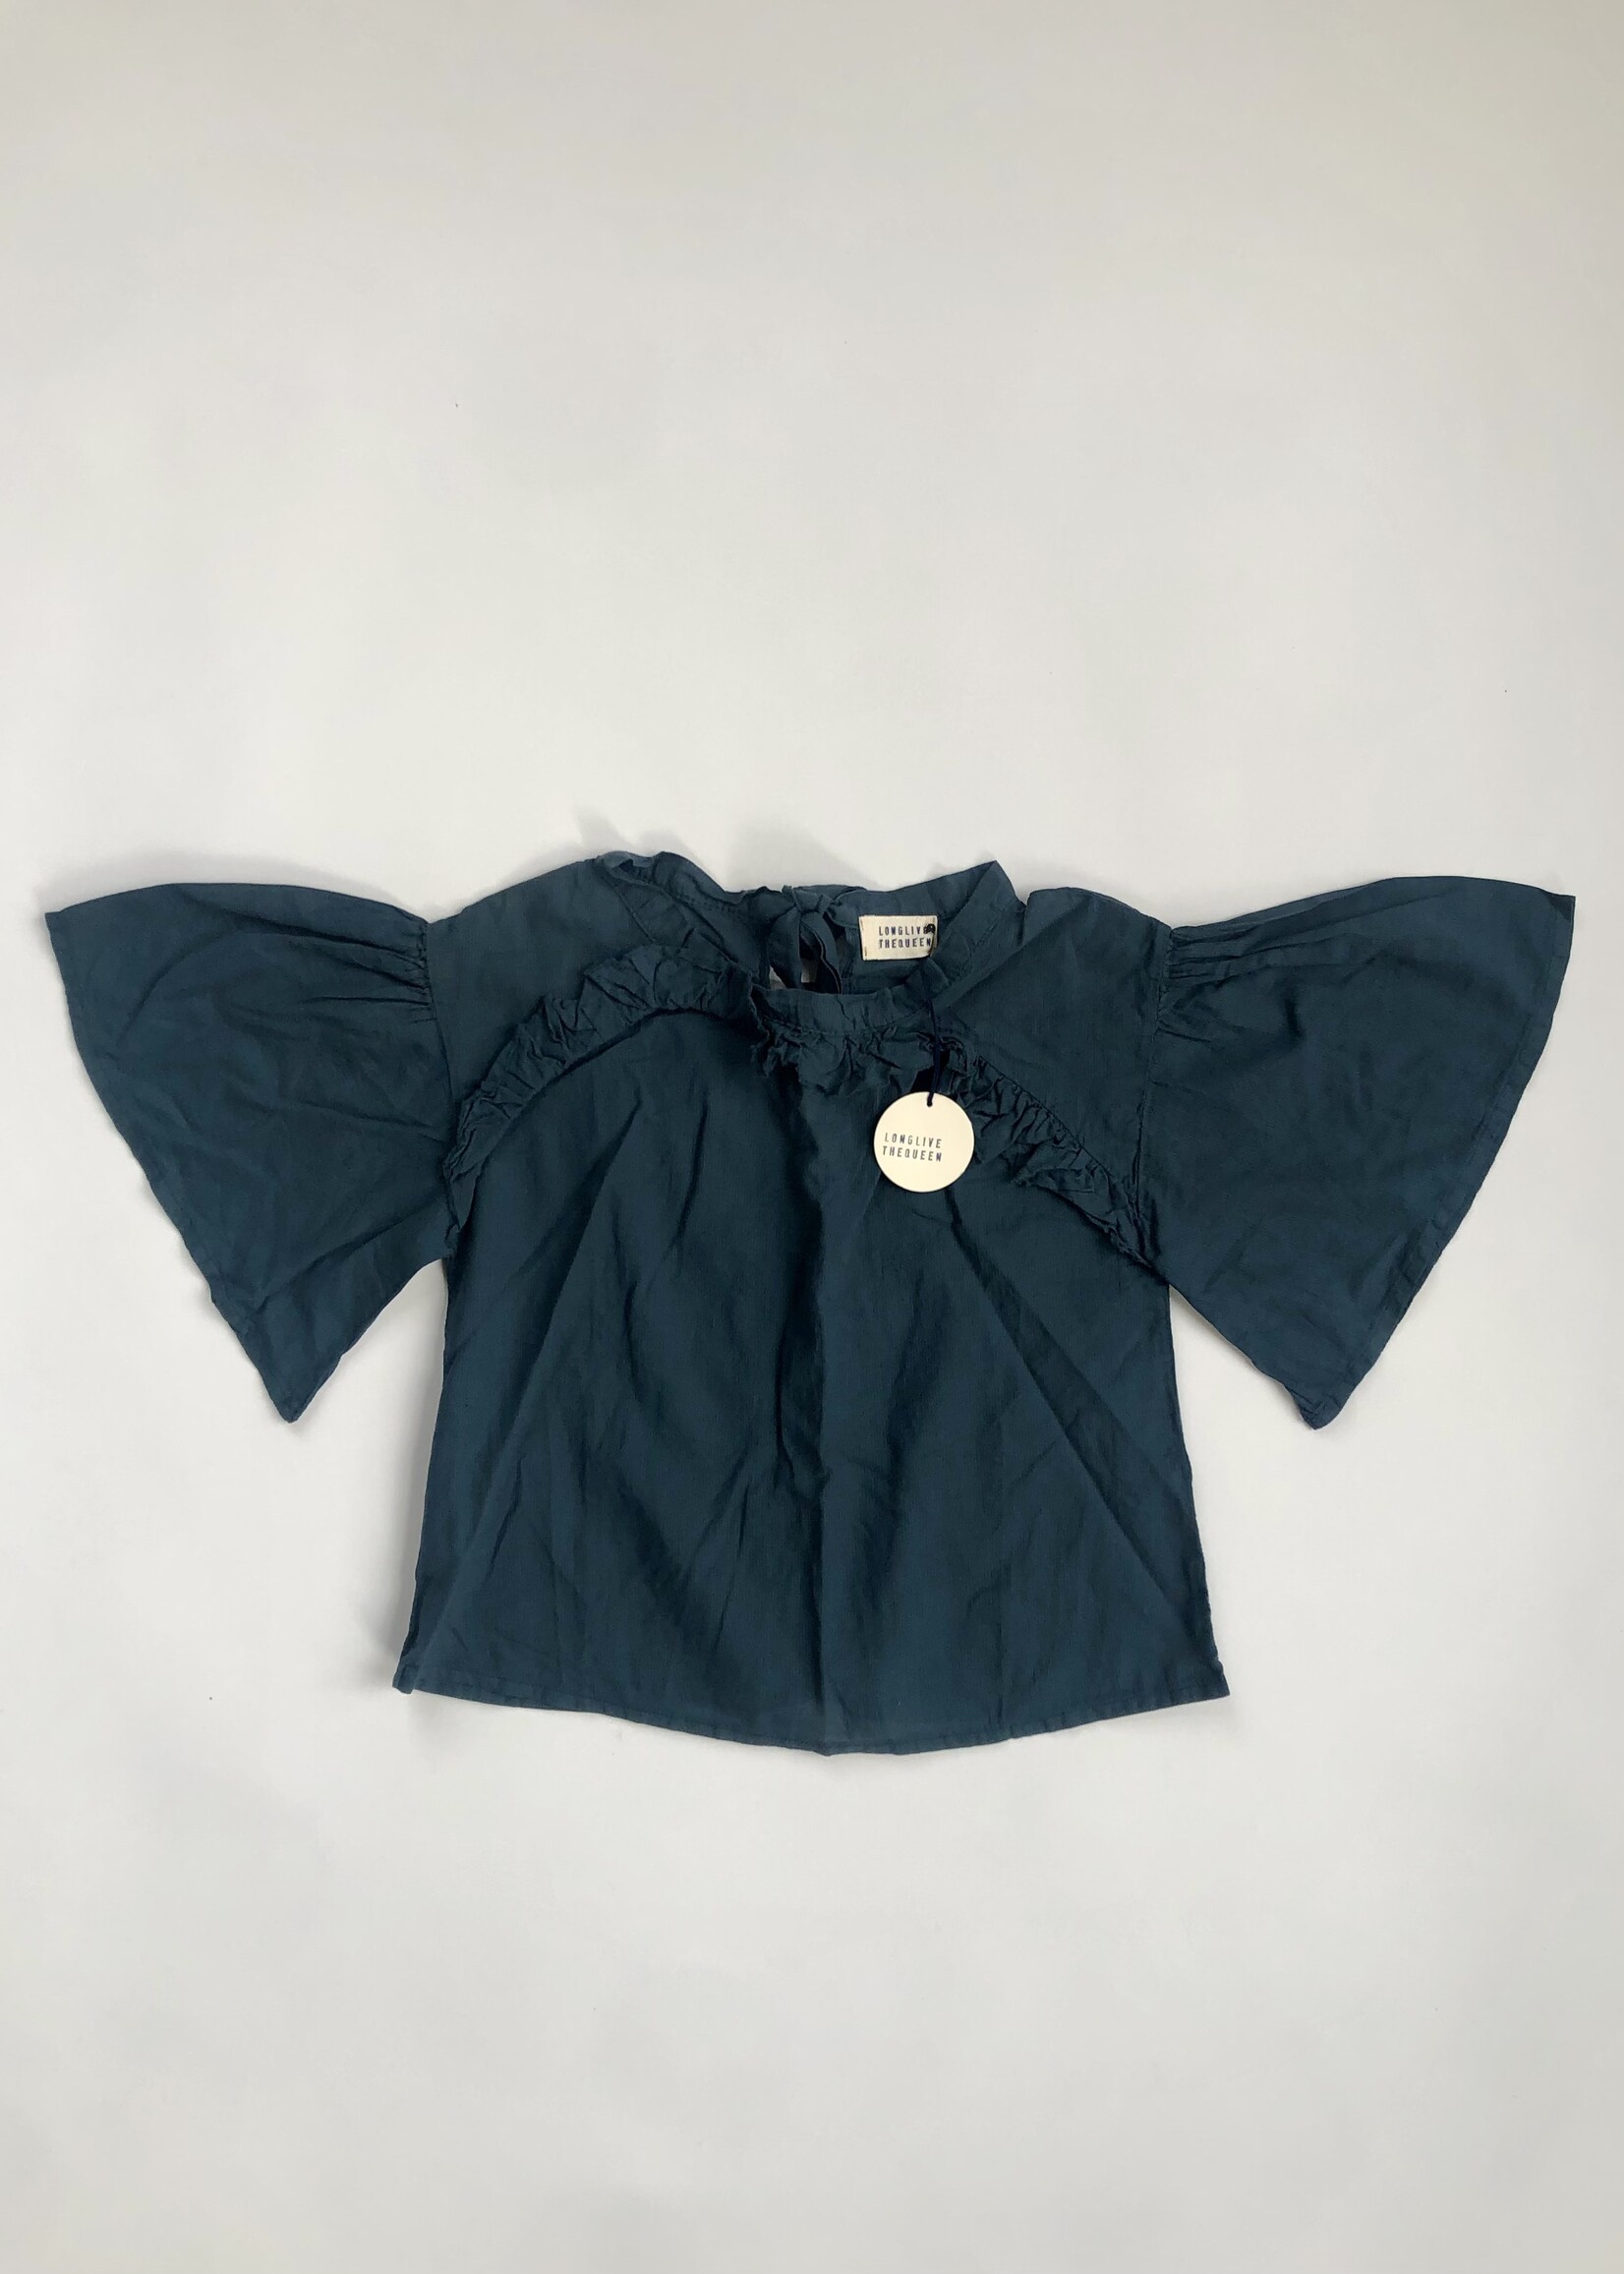 Long Live The Queen Blue grey Ruffle blouse 4-6y